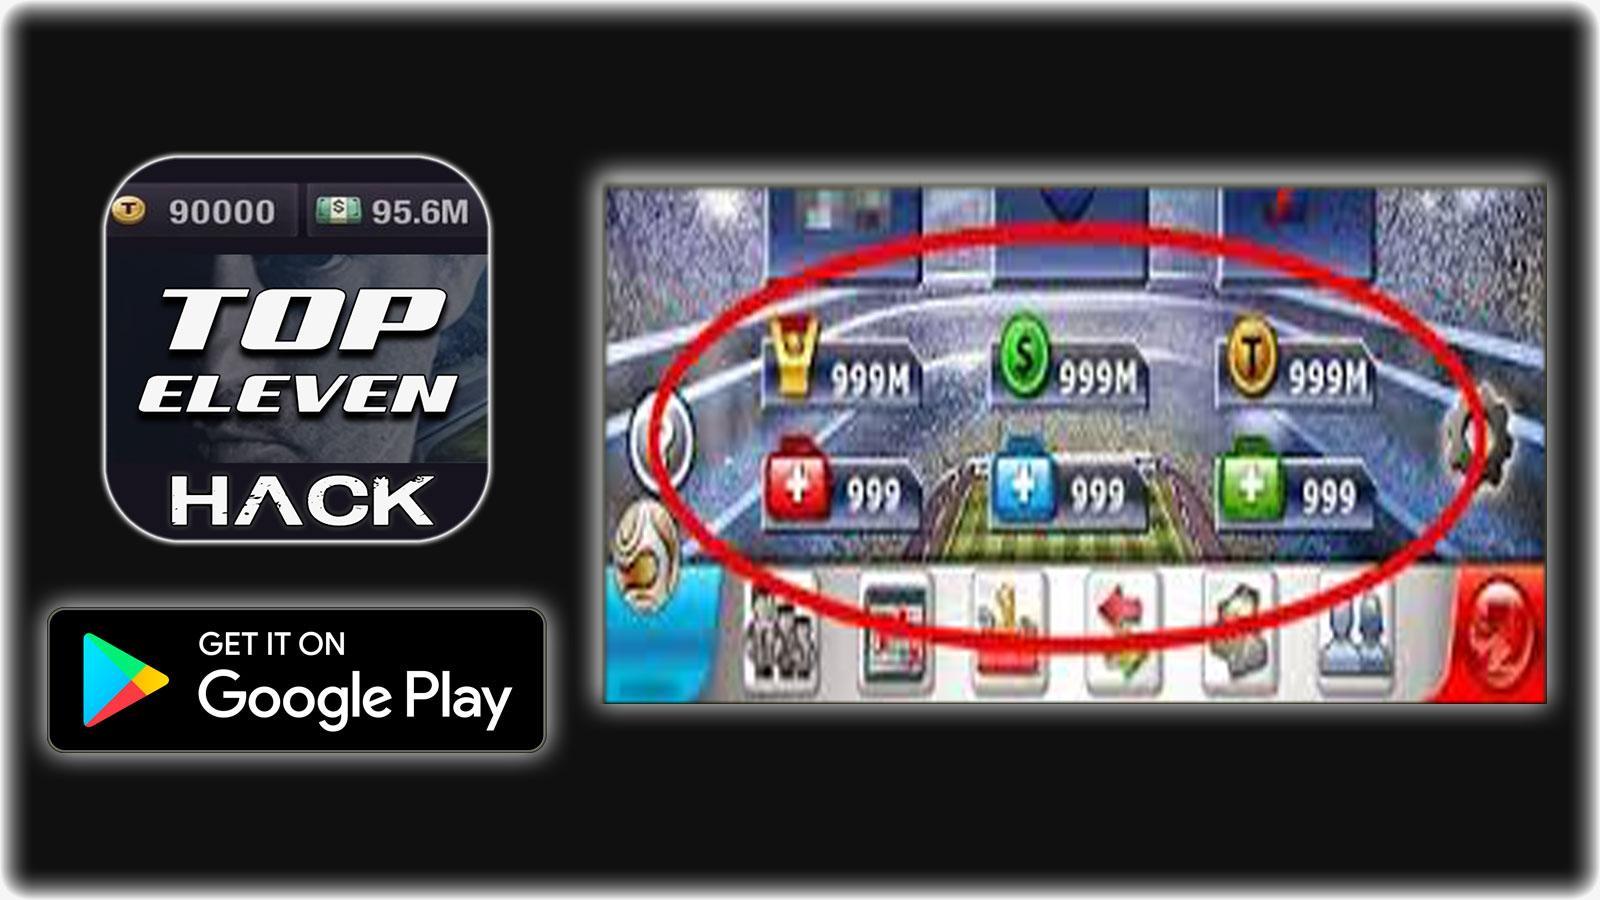 Hack For Top Eleven Cheats New Prank! for Android - APK Download